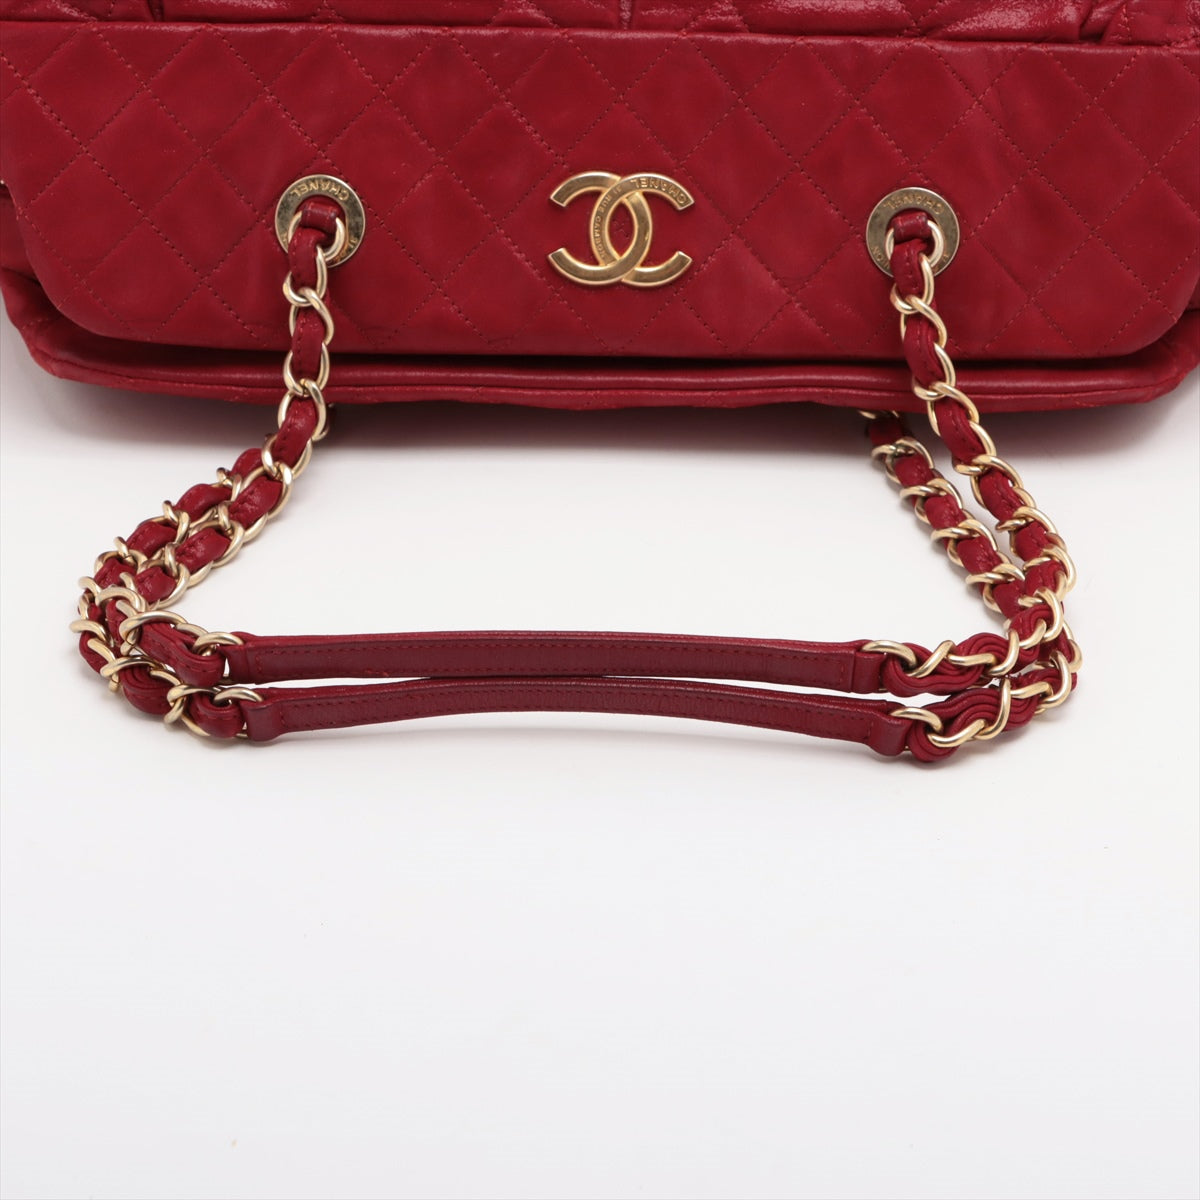 Chanel Matelasse Coating leather Chain shoulder bag Red Gold Metal fittings 15XXXXXX